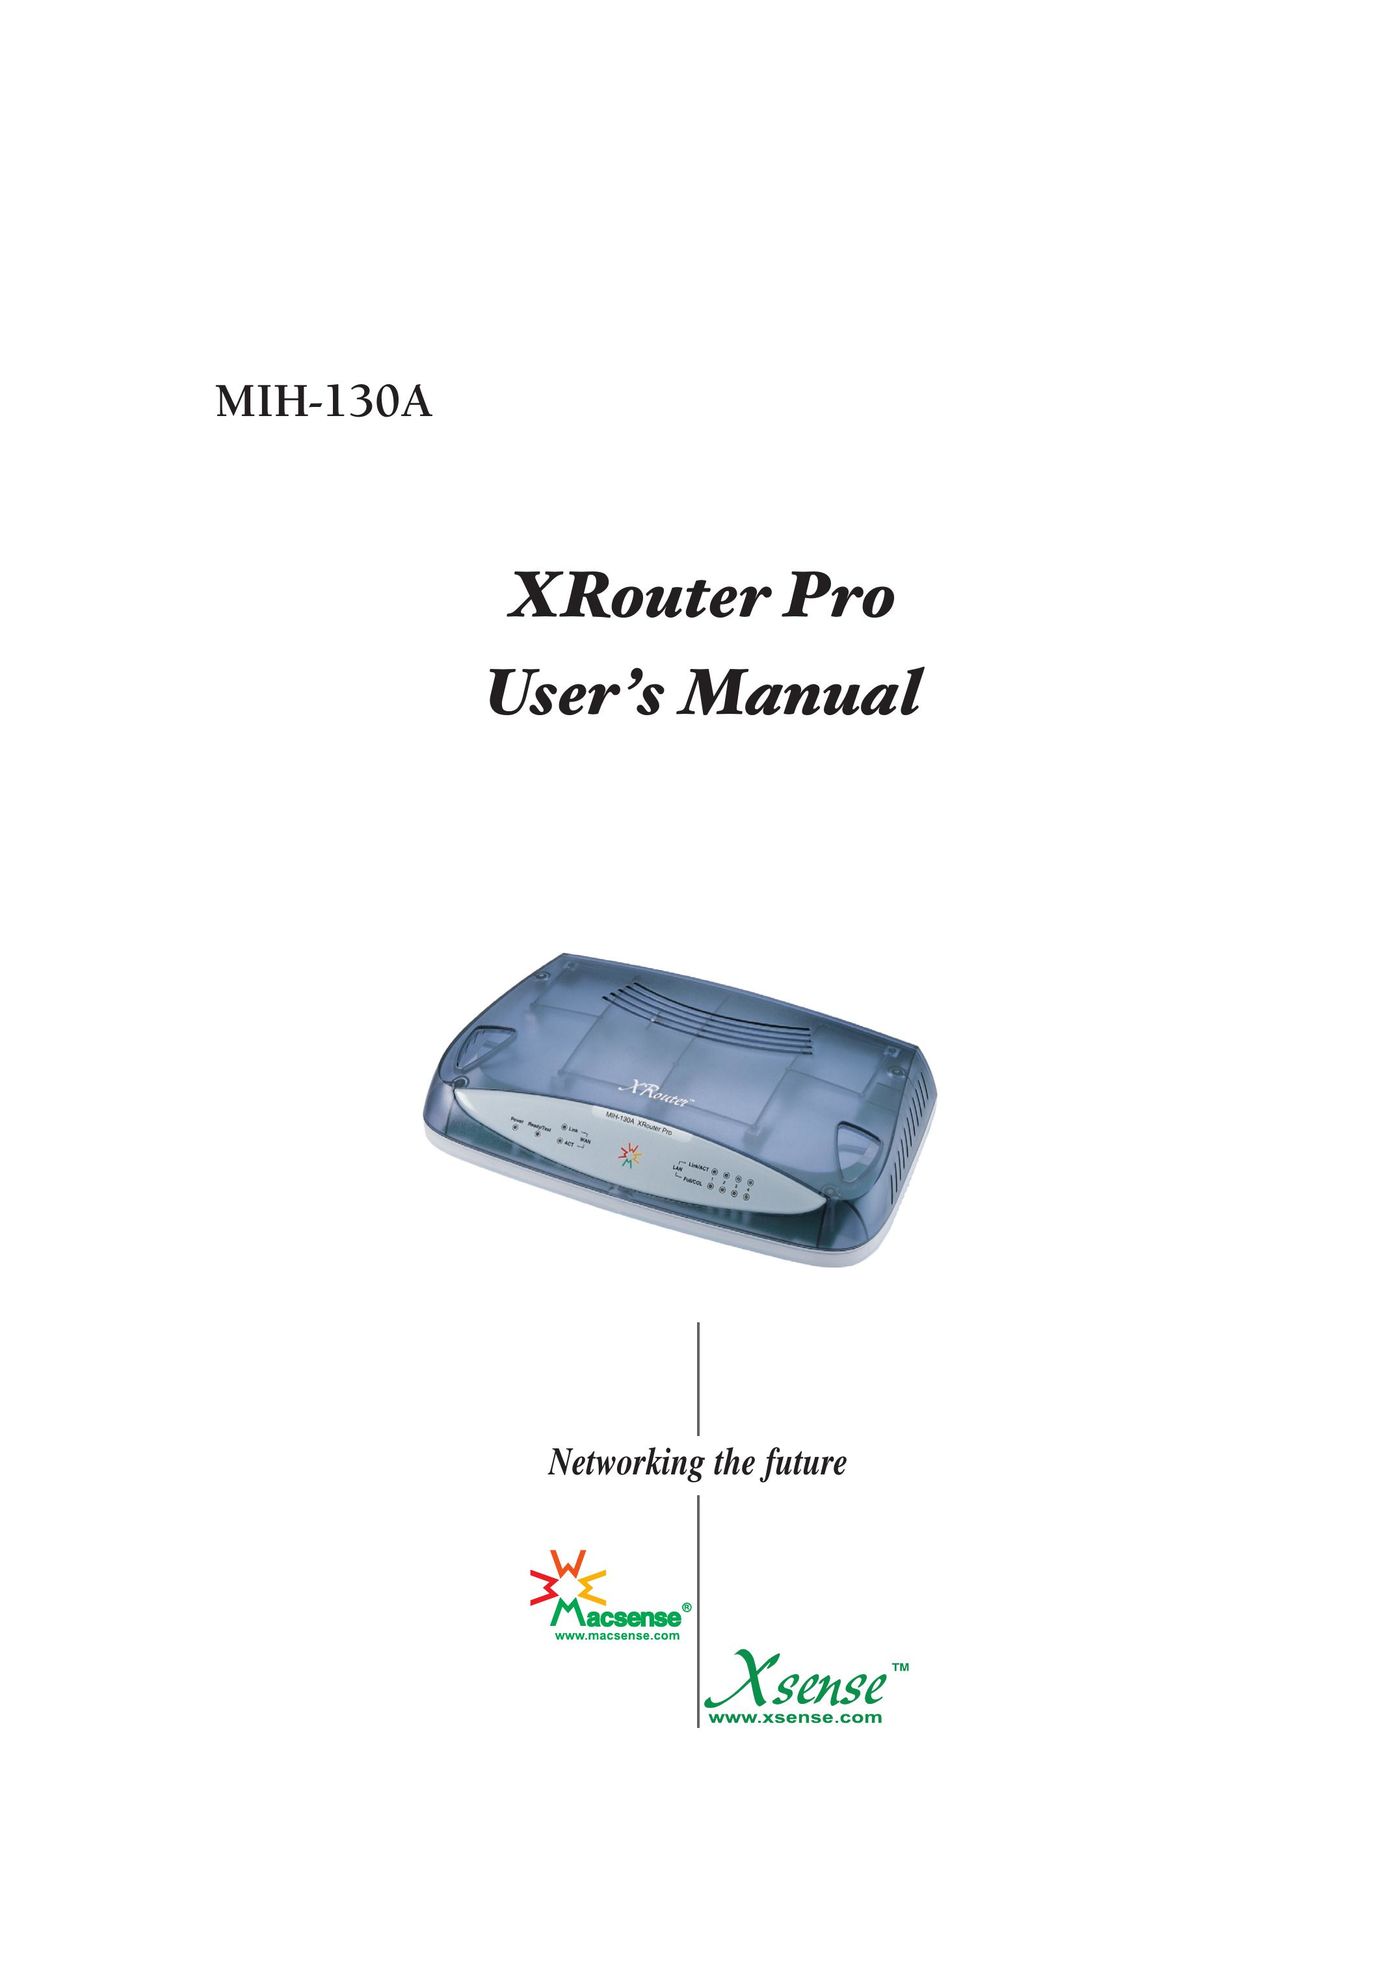 Macsense Connectivity XRouter Pro Switch User Manual